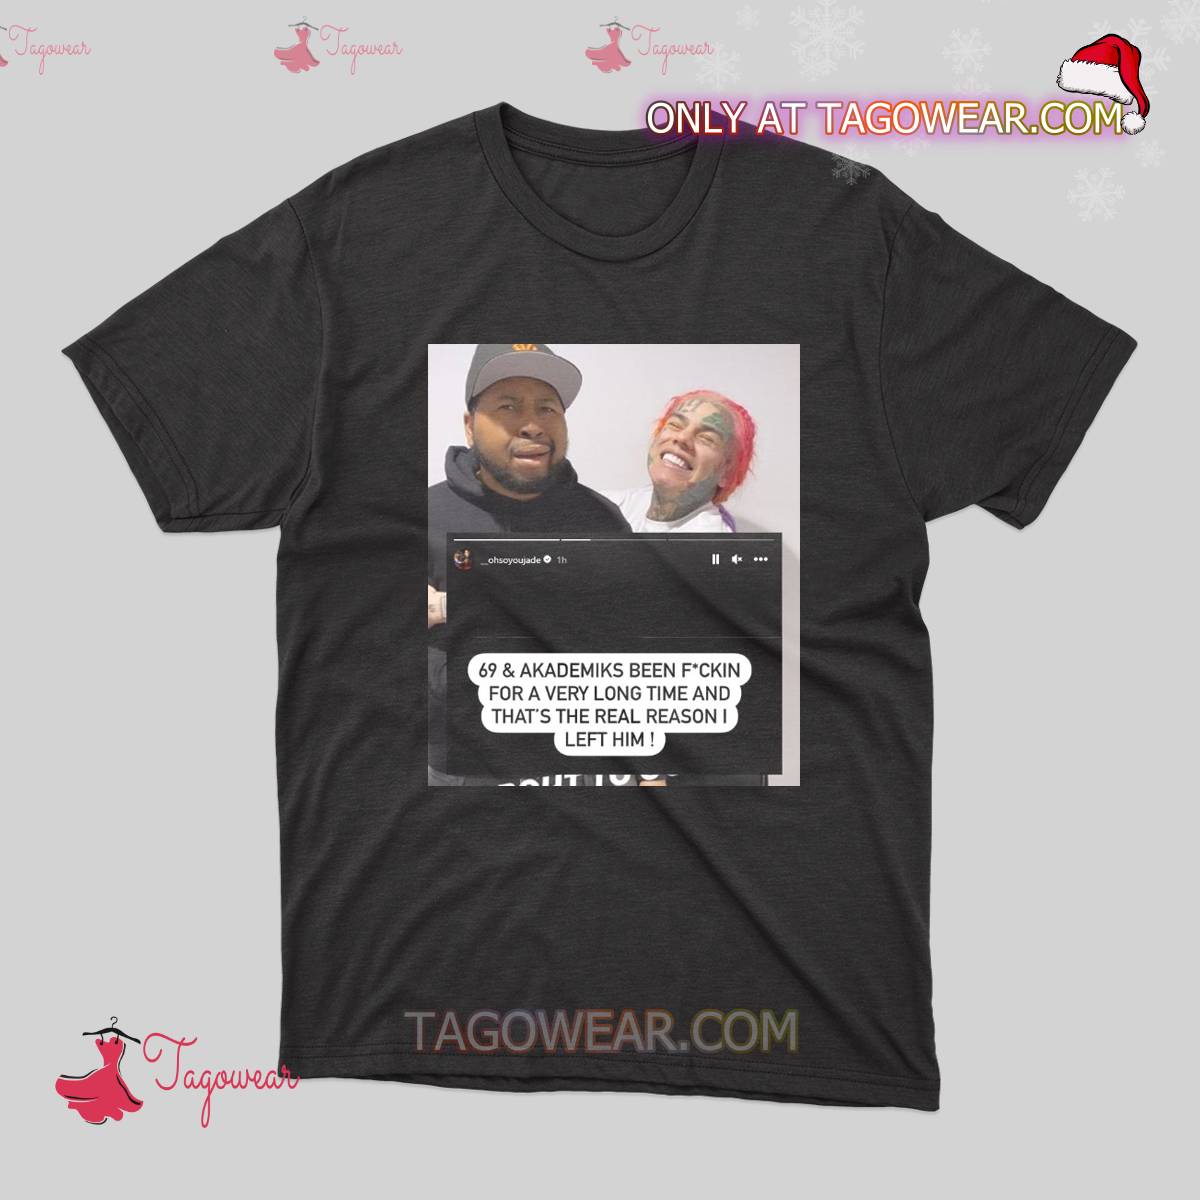 6ix9ine Ex-girlfriend Claims That She Left Him Because He Was Having S*x With Dj Akademiks Shirt a